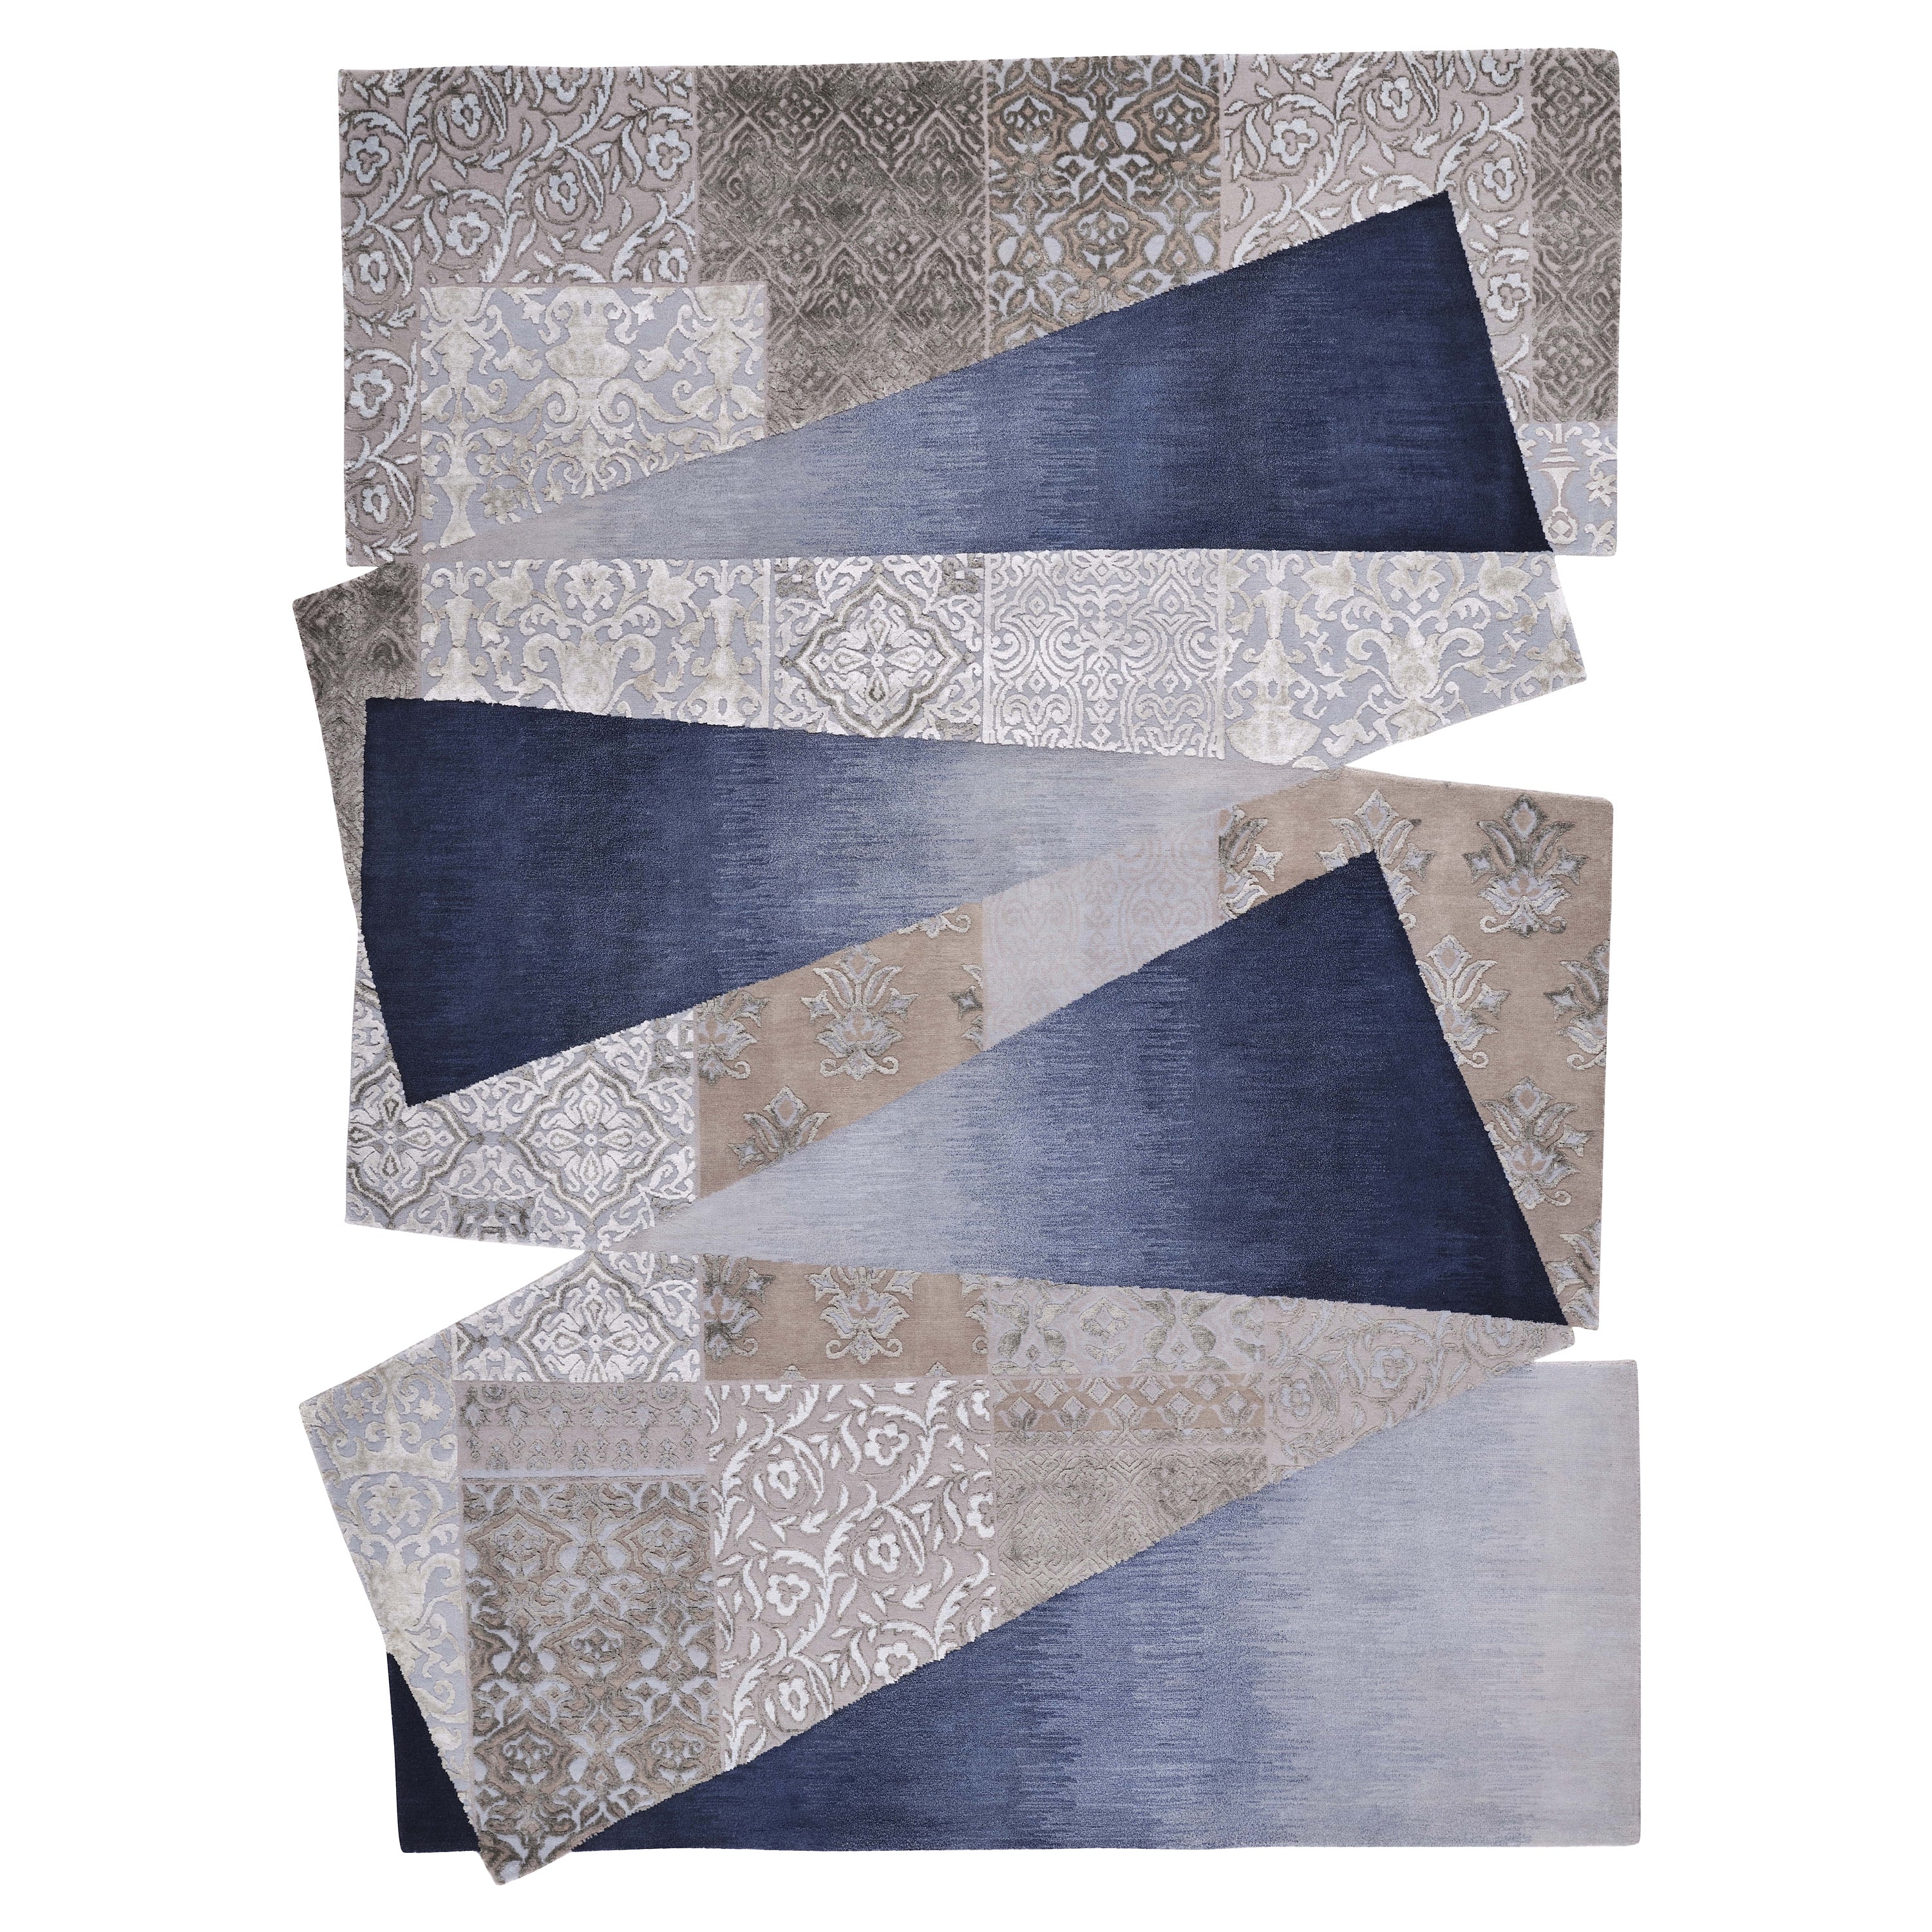 IMRAK Hand Knotted Transitional Contemporary Rug in Smoke Blue Colour by Hands